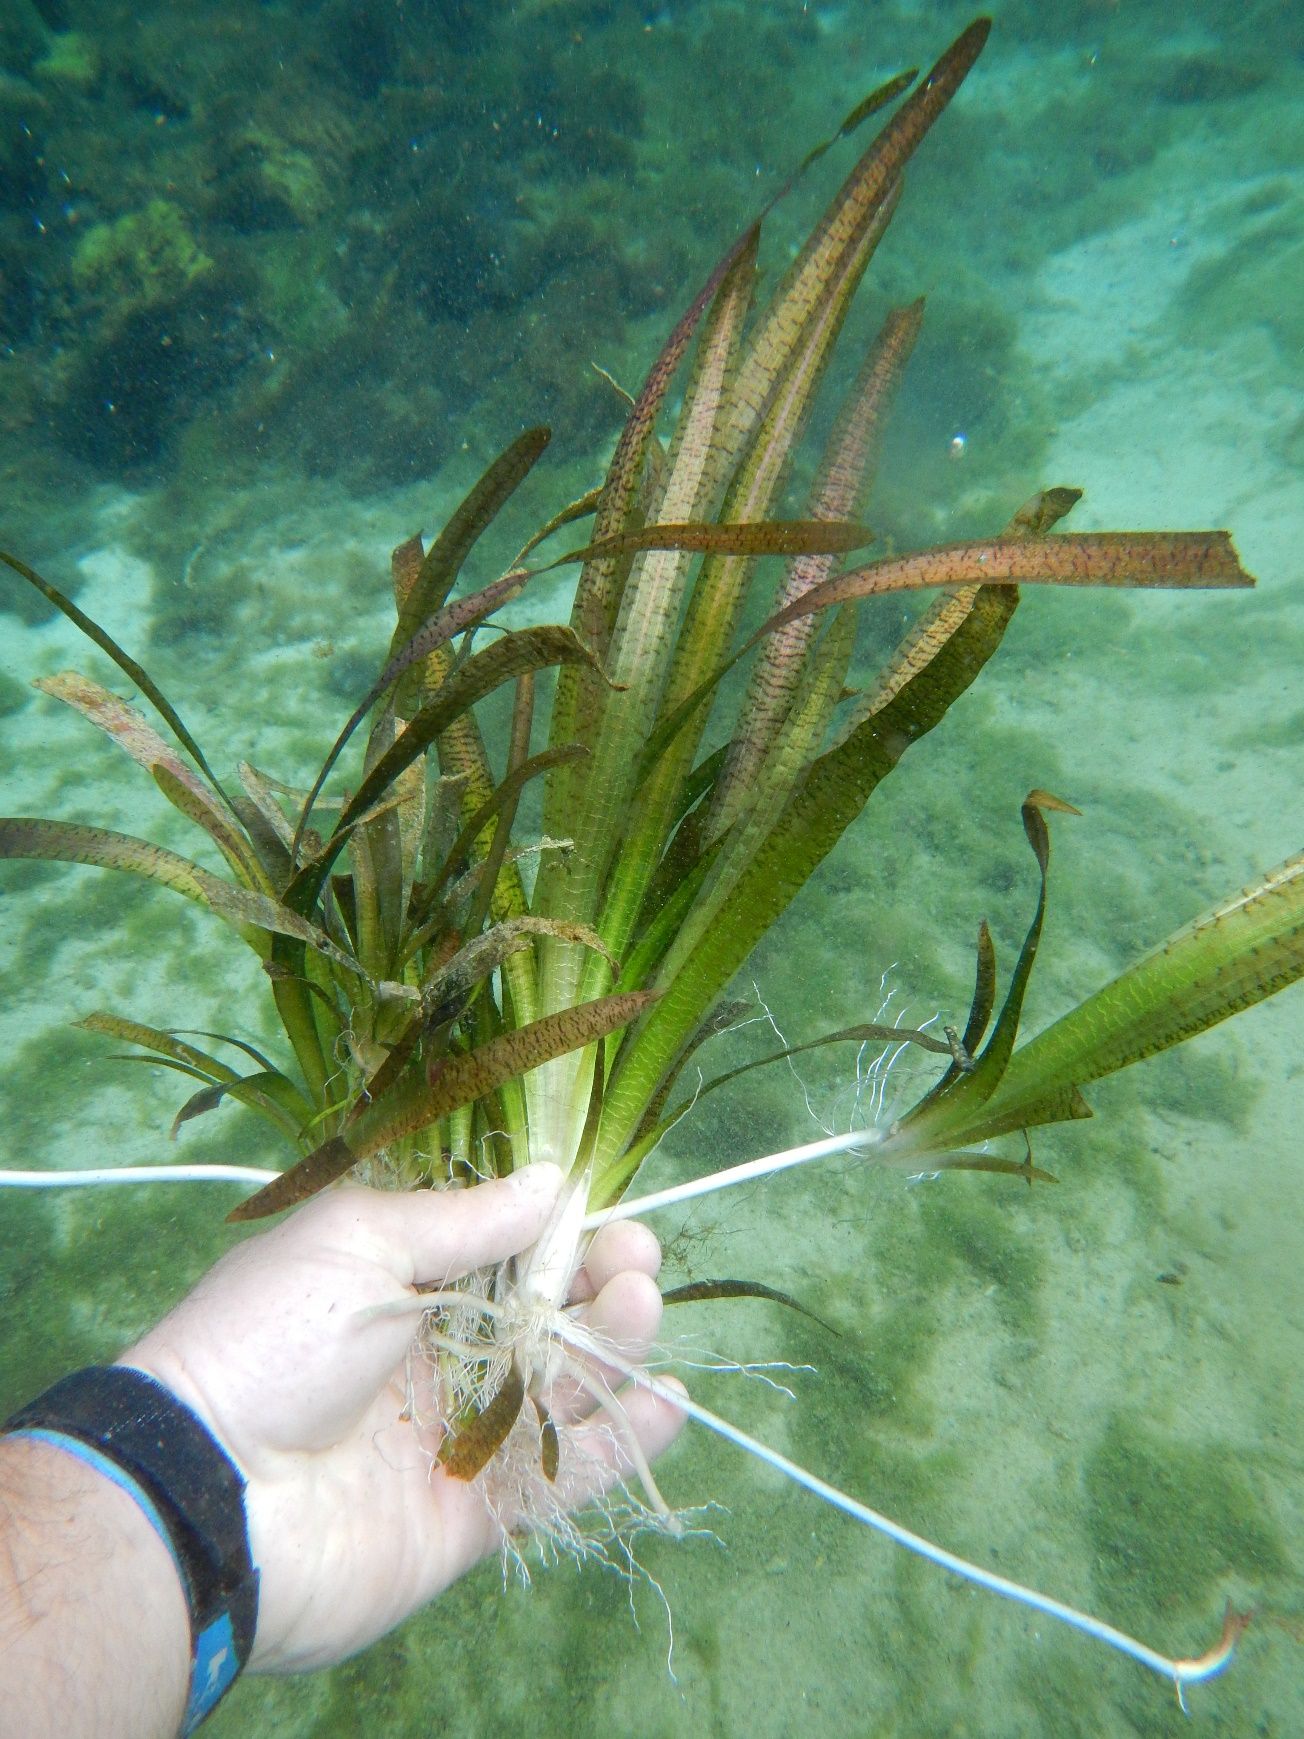 A Vallisneria sp. displaying stolons, or runners (in white). The runners grow on the surface of the substrate and produce “daughter” plants at their ends. 